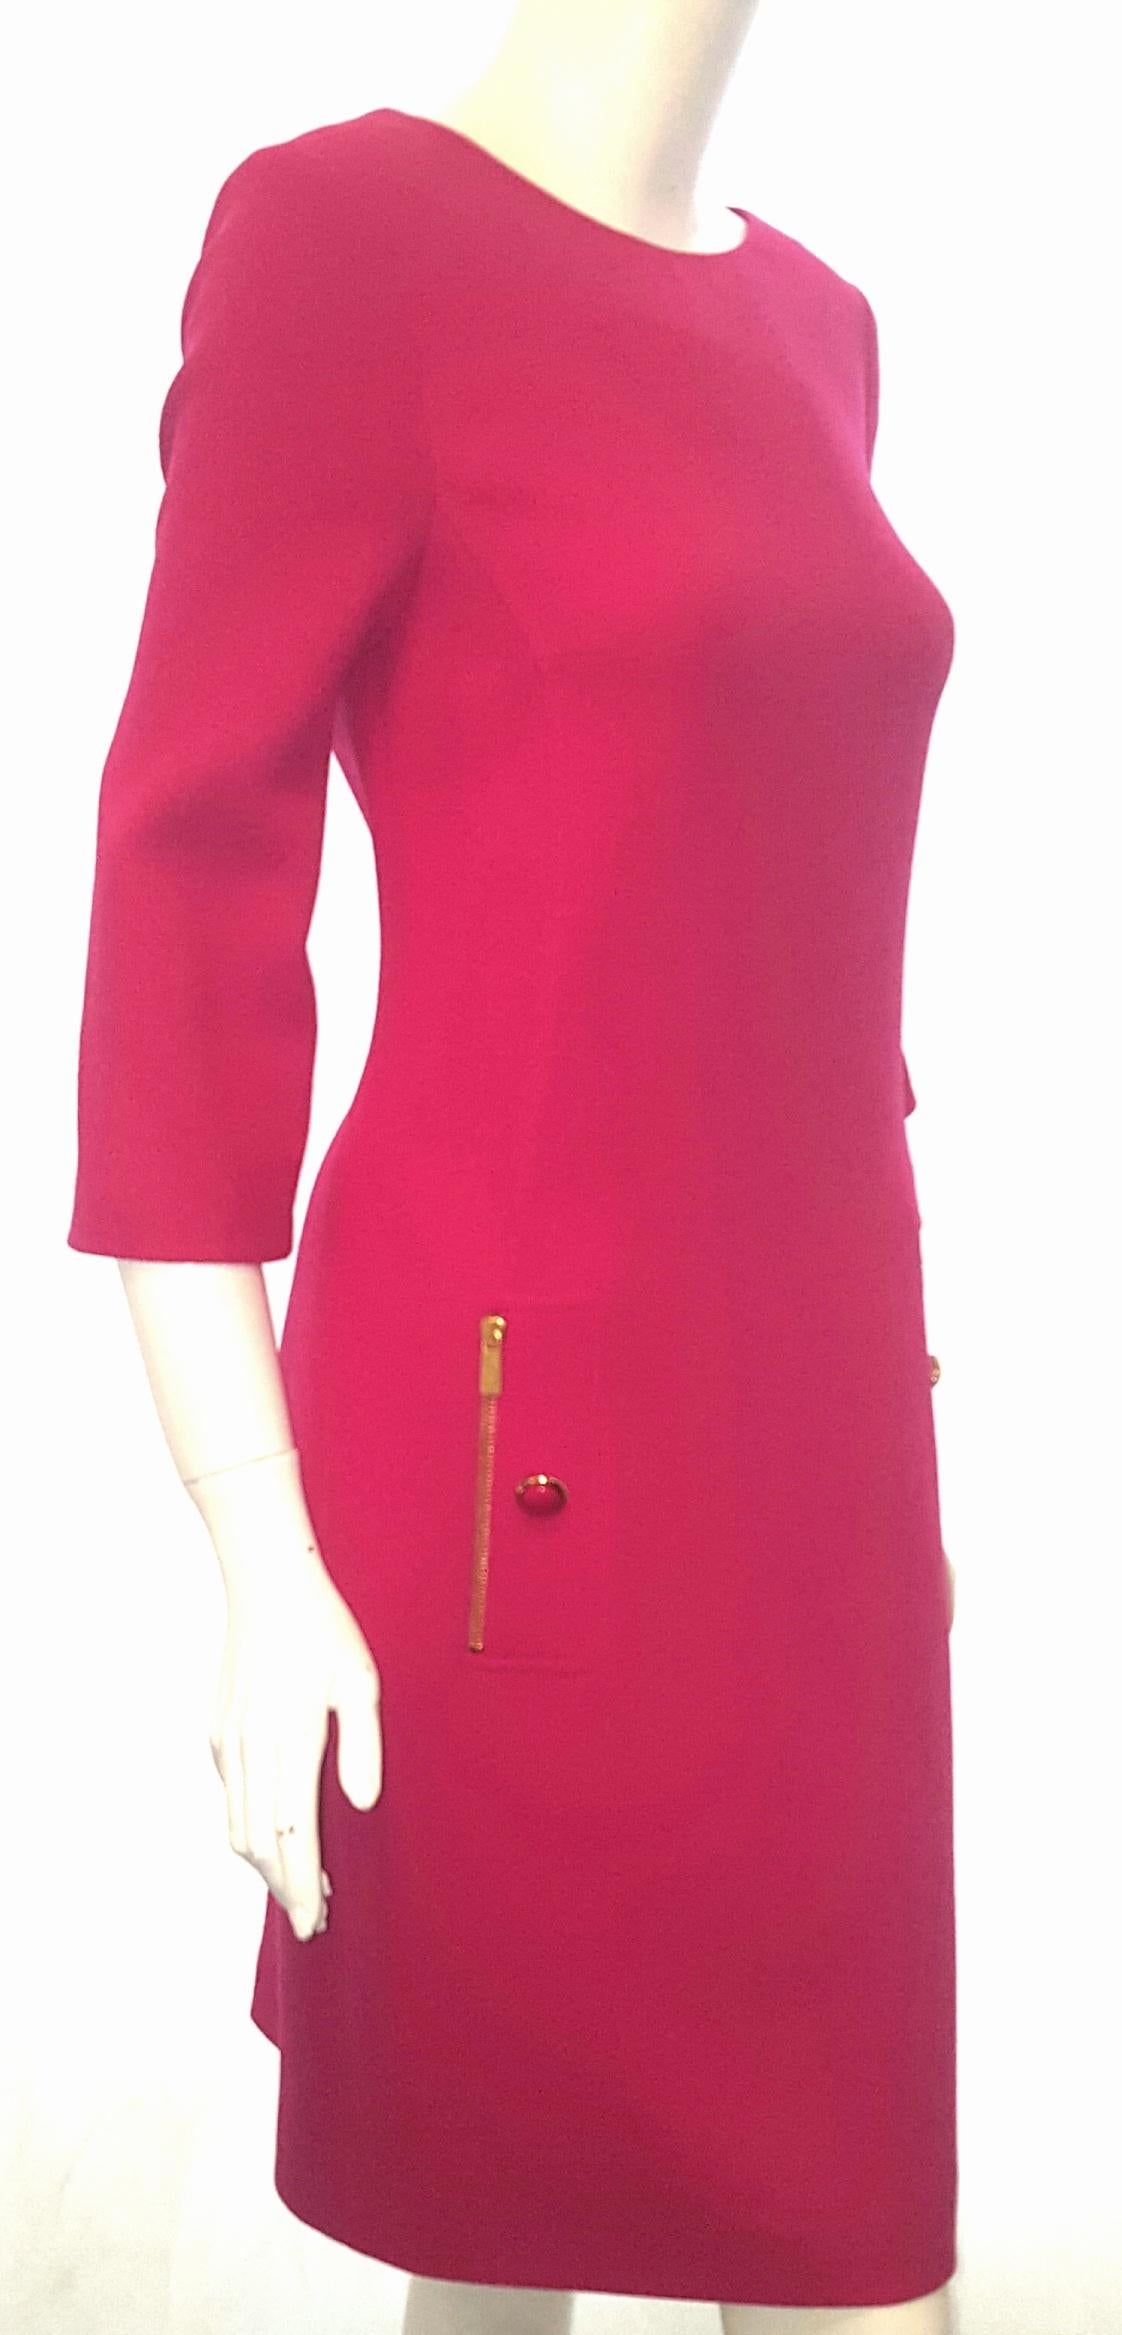 Michael Kors fuschia dress 3/4 sleeve includes side pockets with gold tone zipper and fuschia button on each pocket.  This jewel neckline dress is lined in pink silk.   This garment is in excellent condition.  Made in Italy.  New with tags.